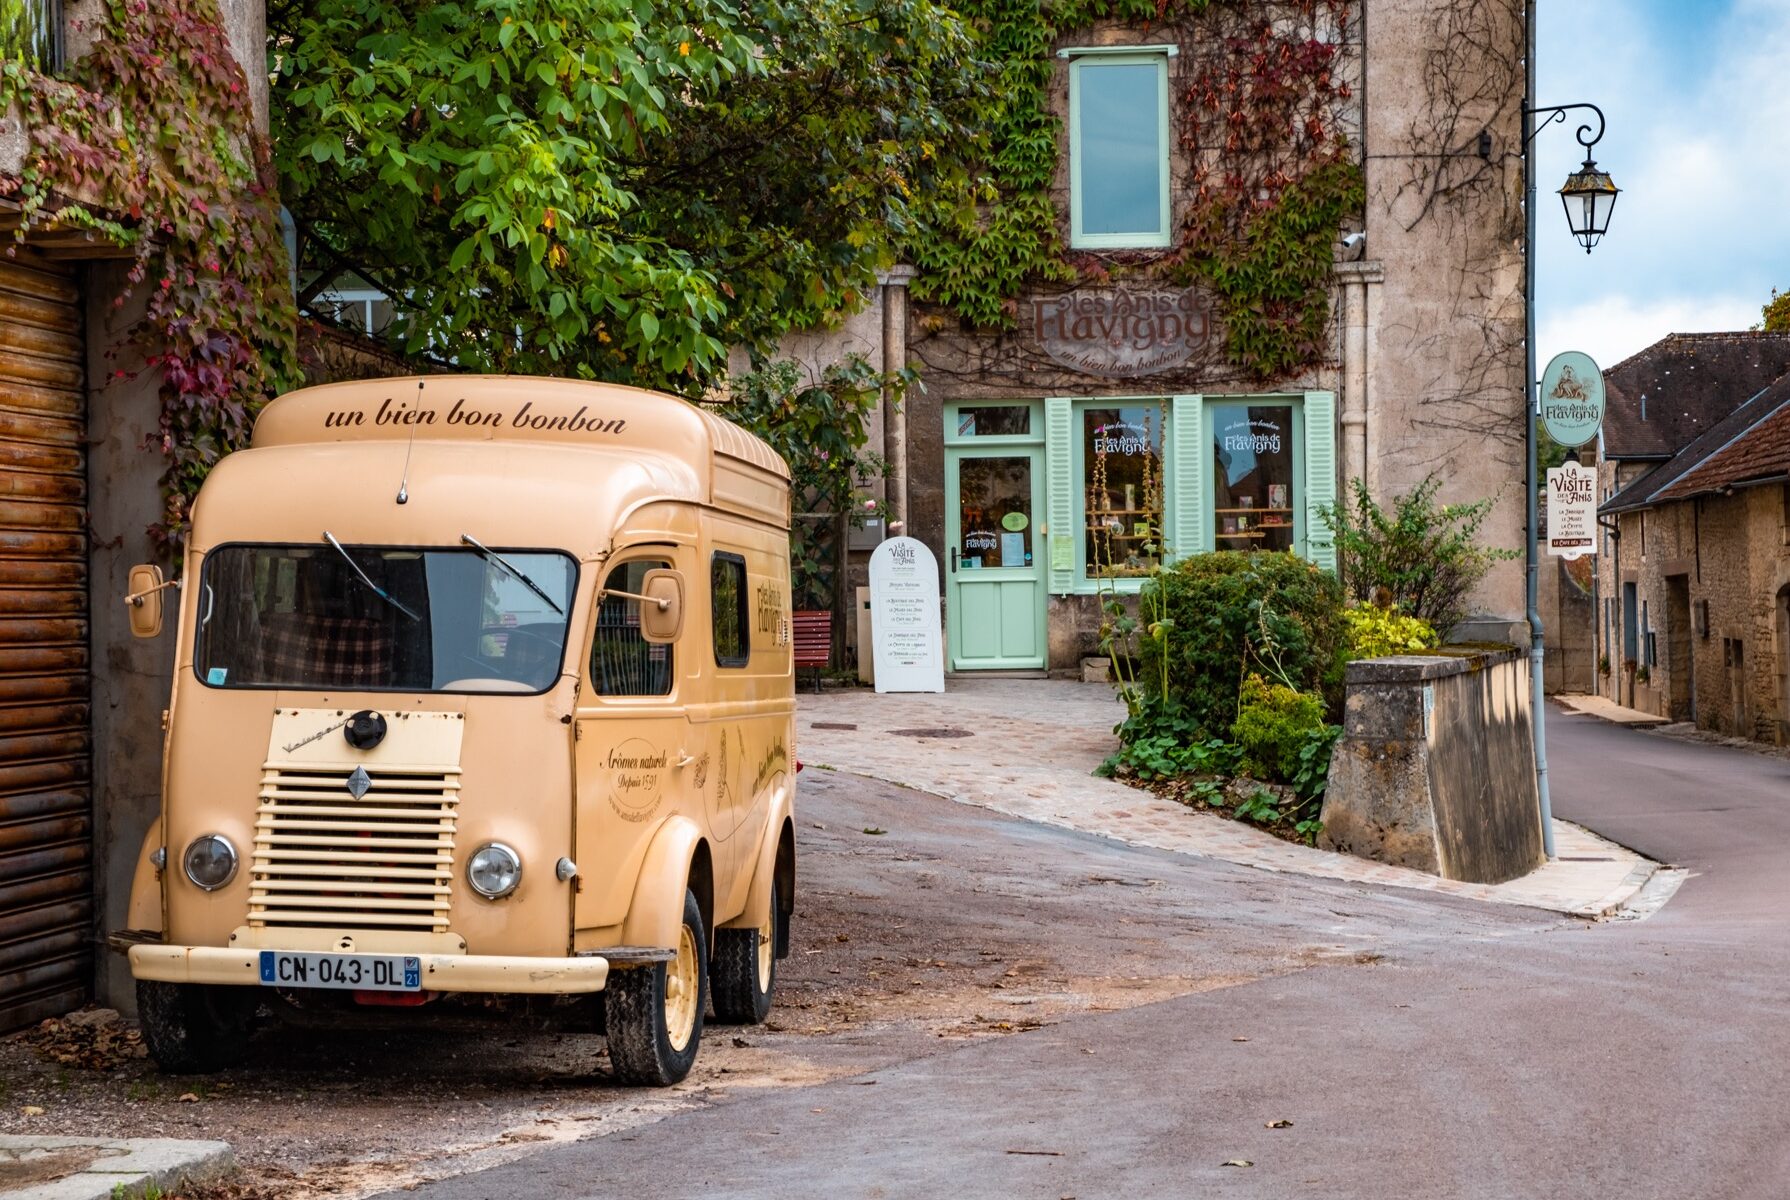 Flavigny sur Ozerain/ Burgundy/ France - 05.10.2019: Flavigny sur Ozerain. Little town in Burgundy, France. On the front line is candy truck "Les Anis de Flavigny" which carries that makes in Flavigny